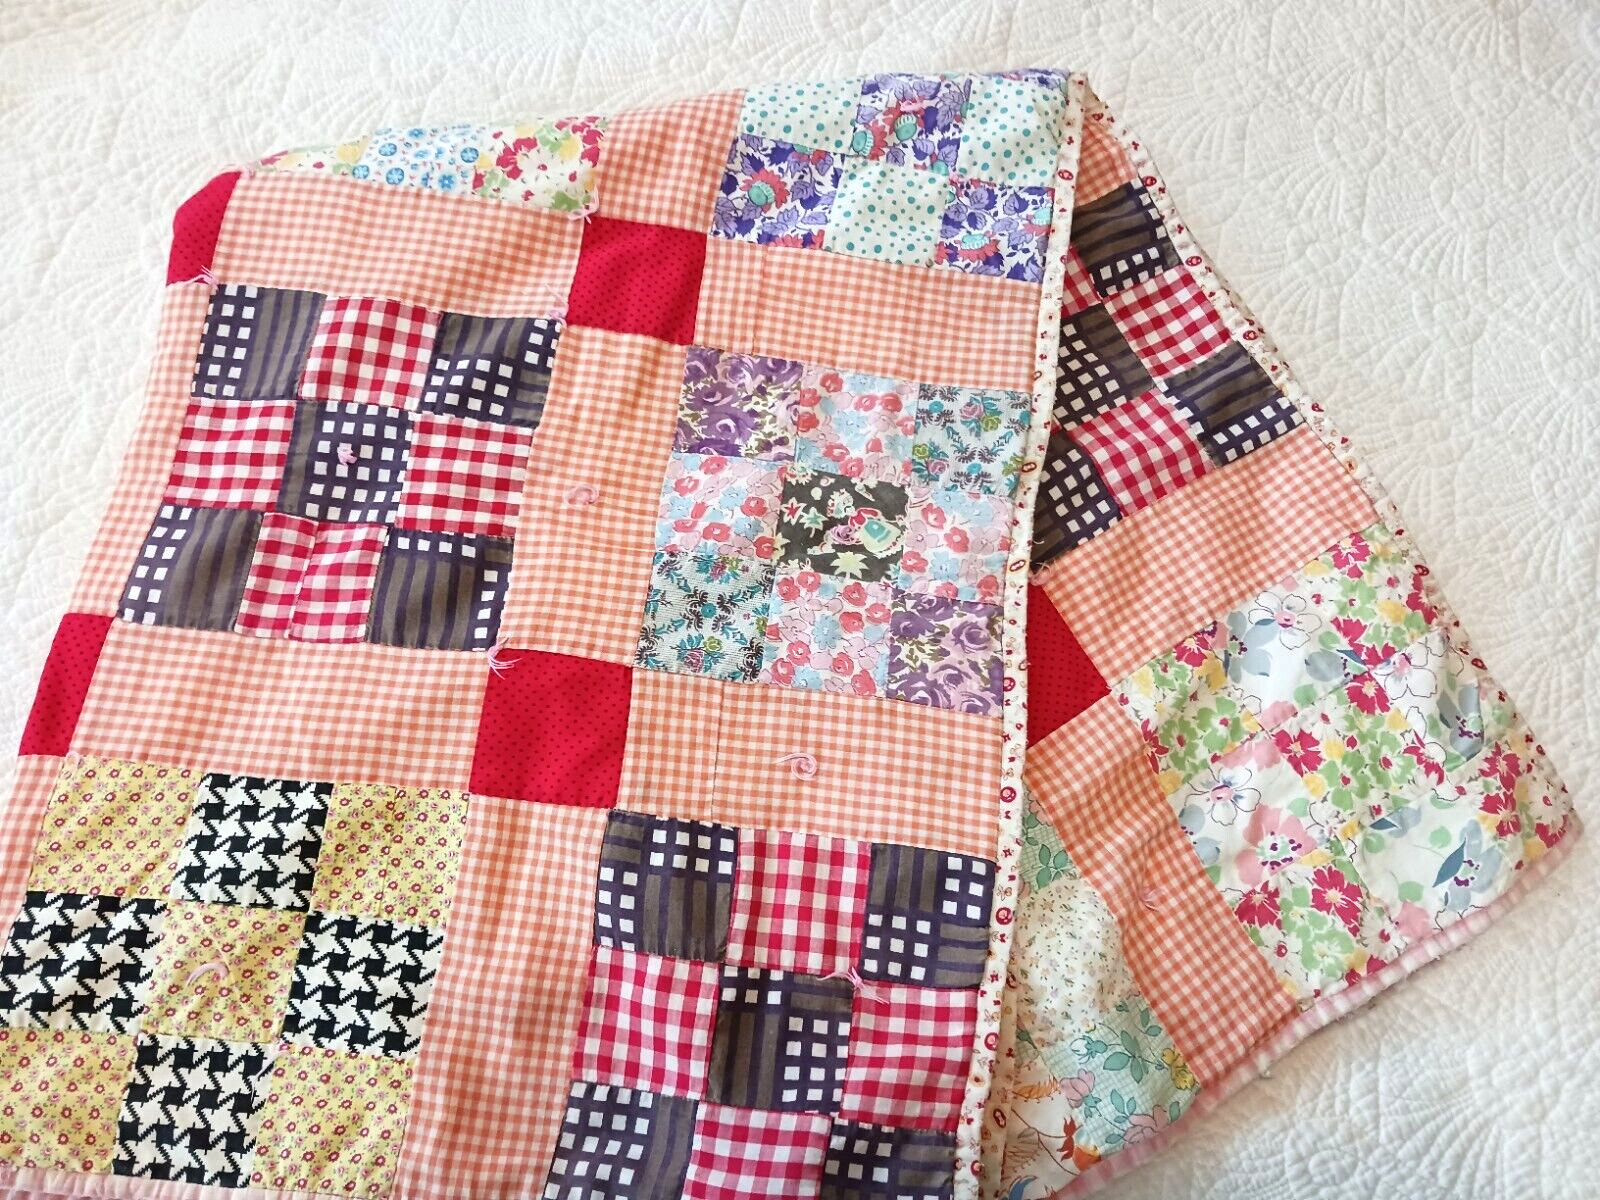 Vtg Homemade Crib or Baby Scrappy Tied Patchwork Quilt 36x46\